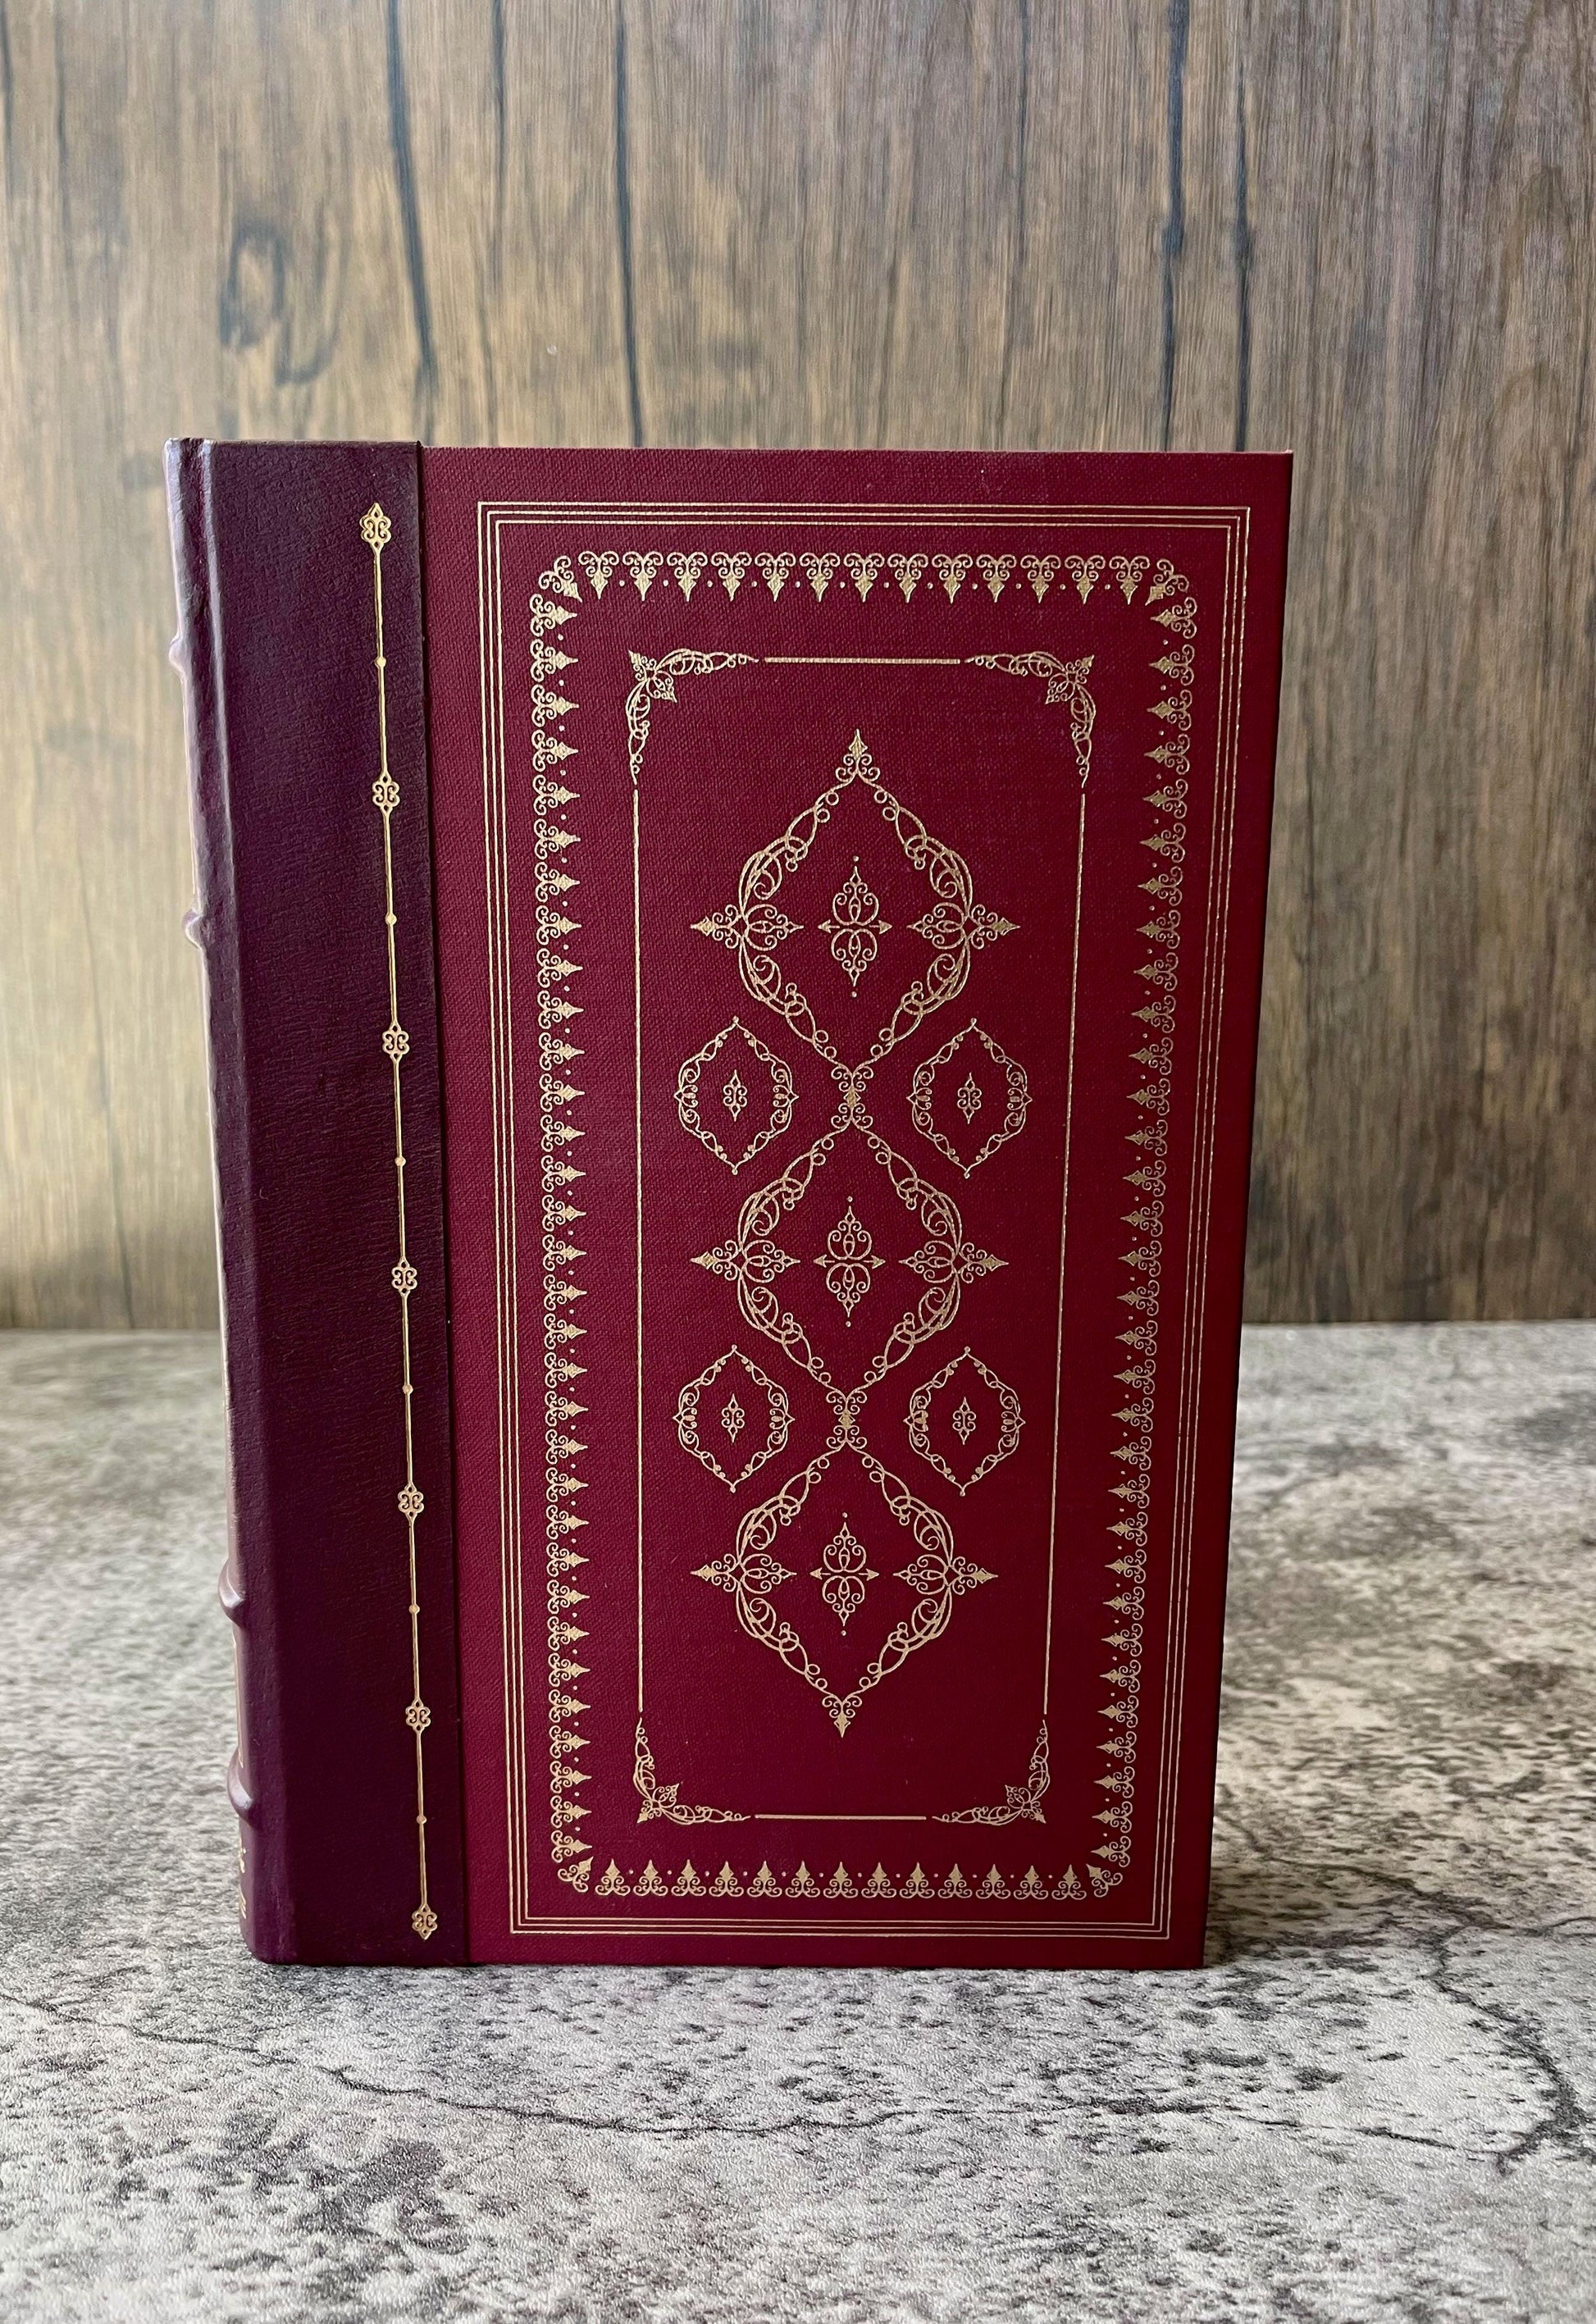 Swann's Way / The Franklin Library / Quarter Bound Leather / 1981 - Precious Cache